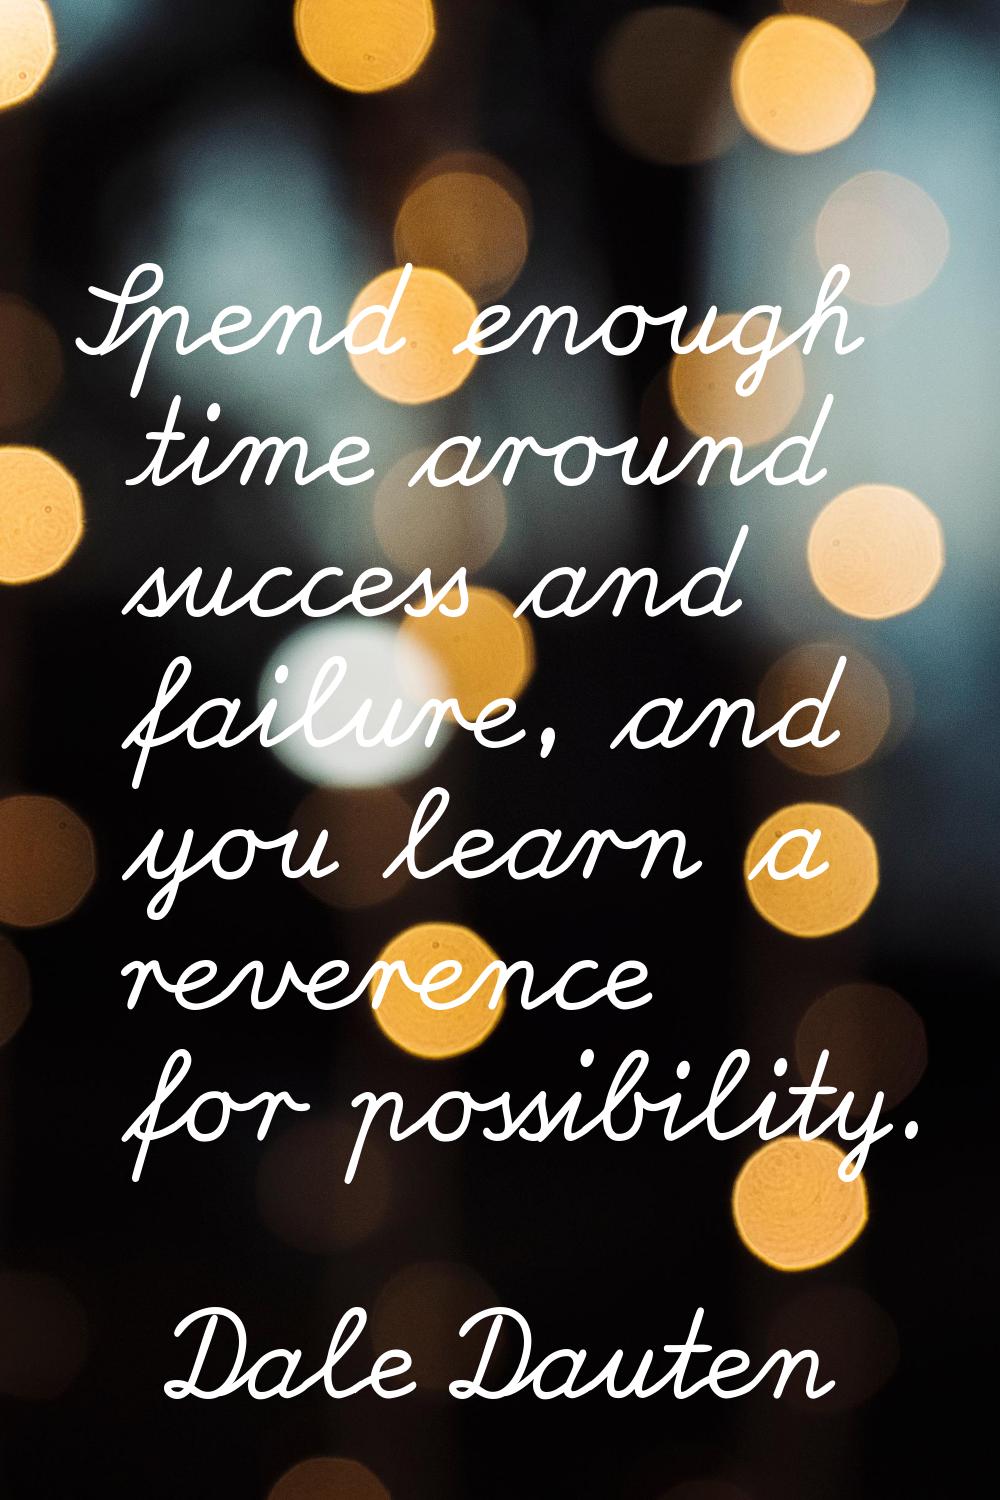 Spend enough time around success and failure, and you learn a reverence for possibility.